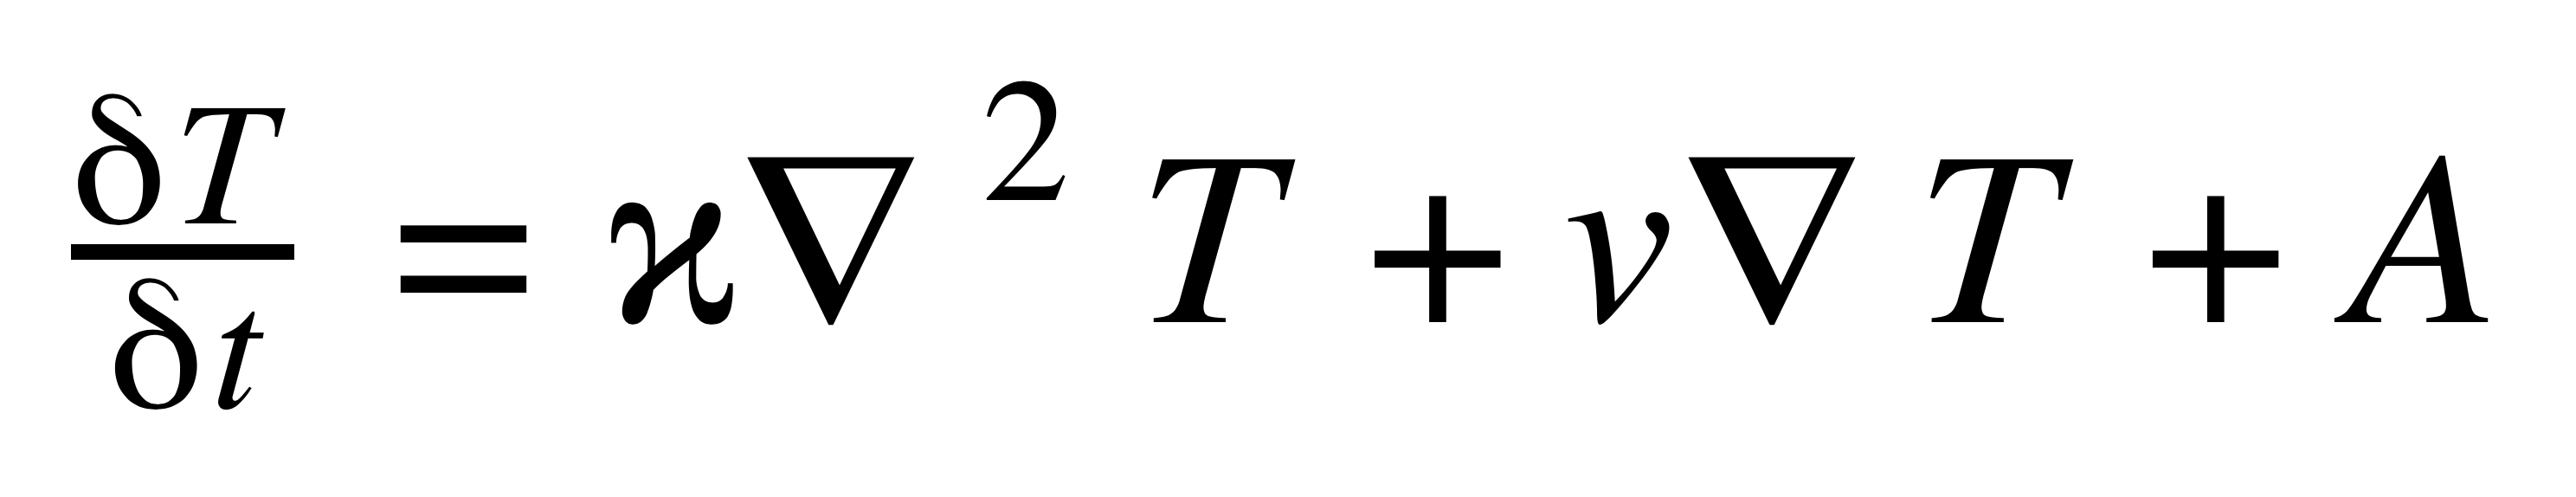 Heat transfer equation.png